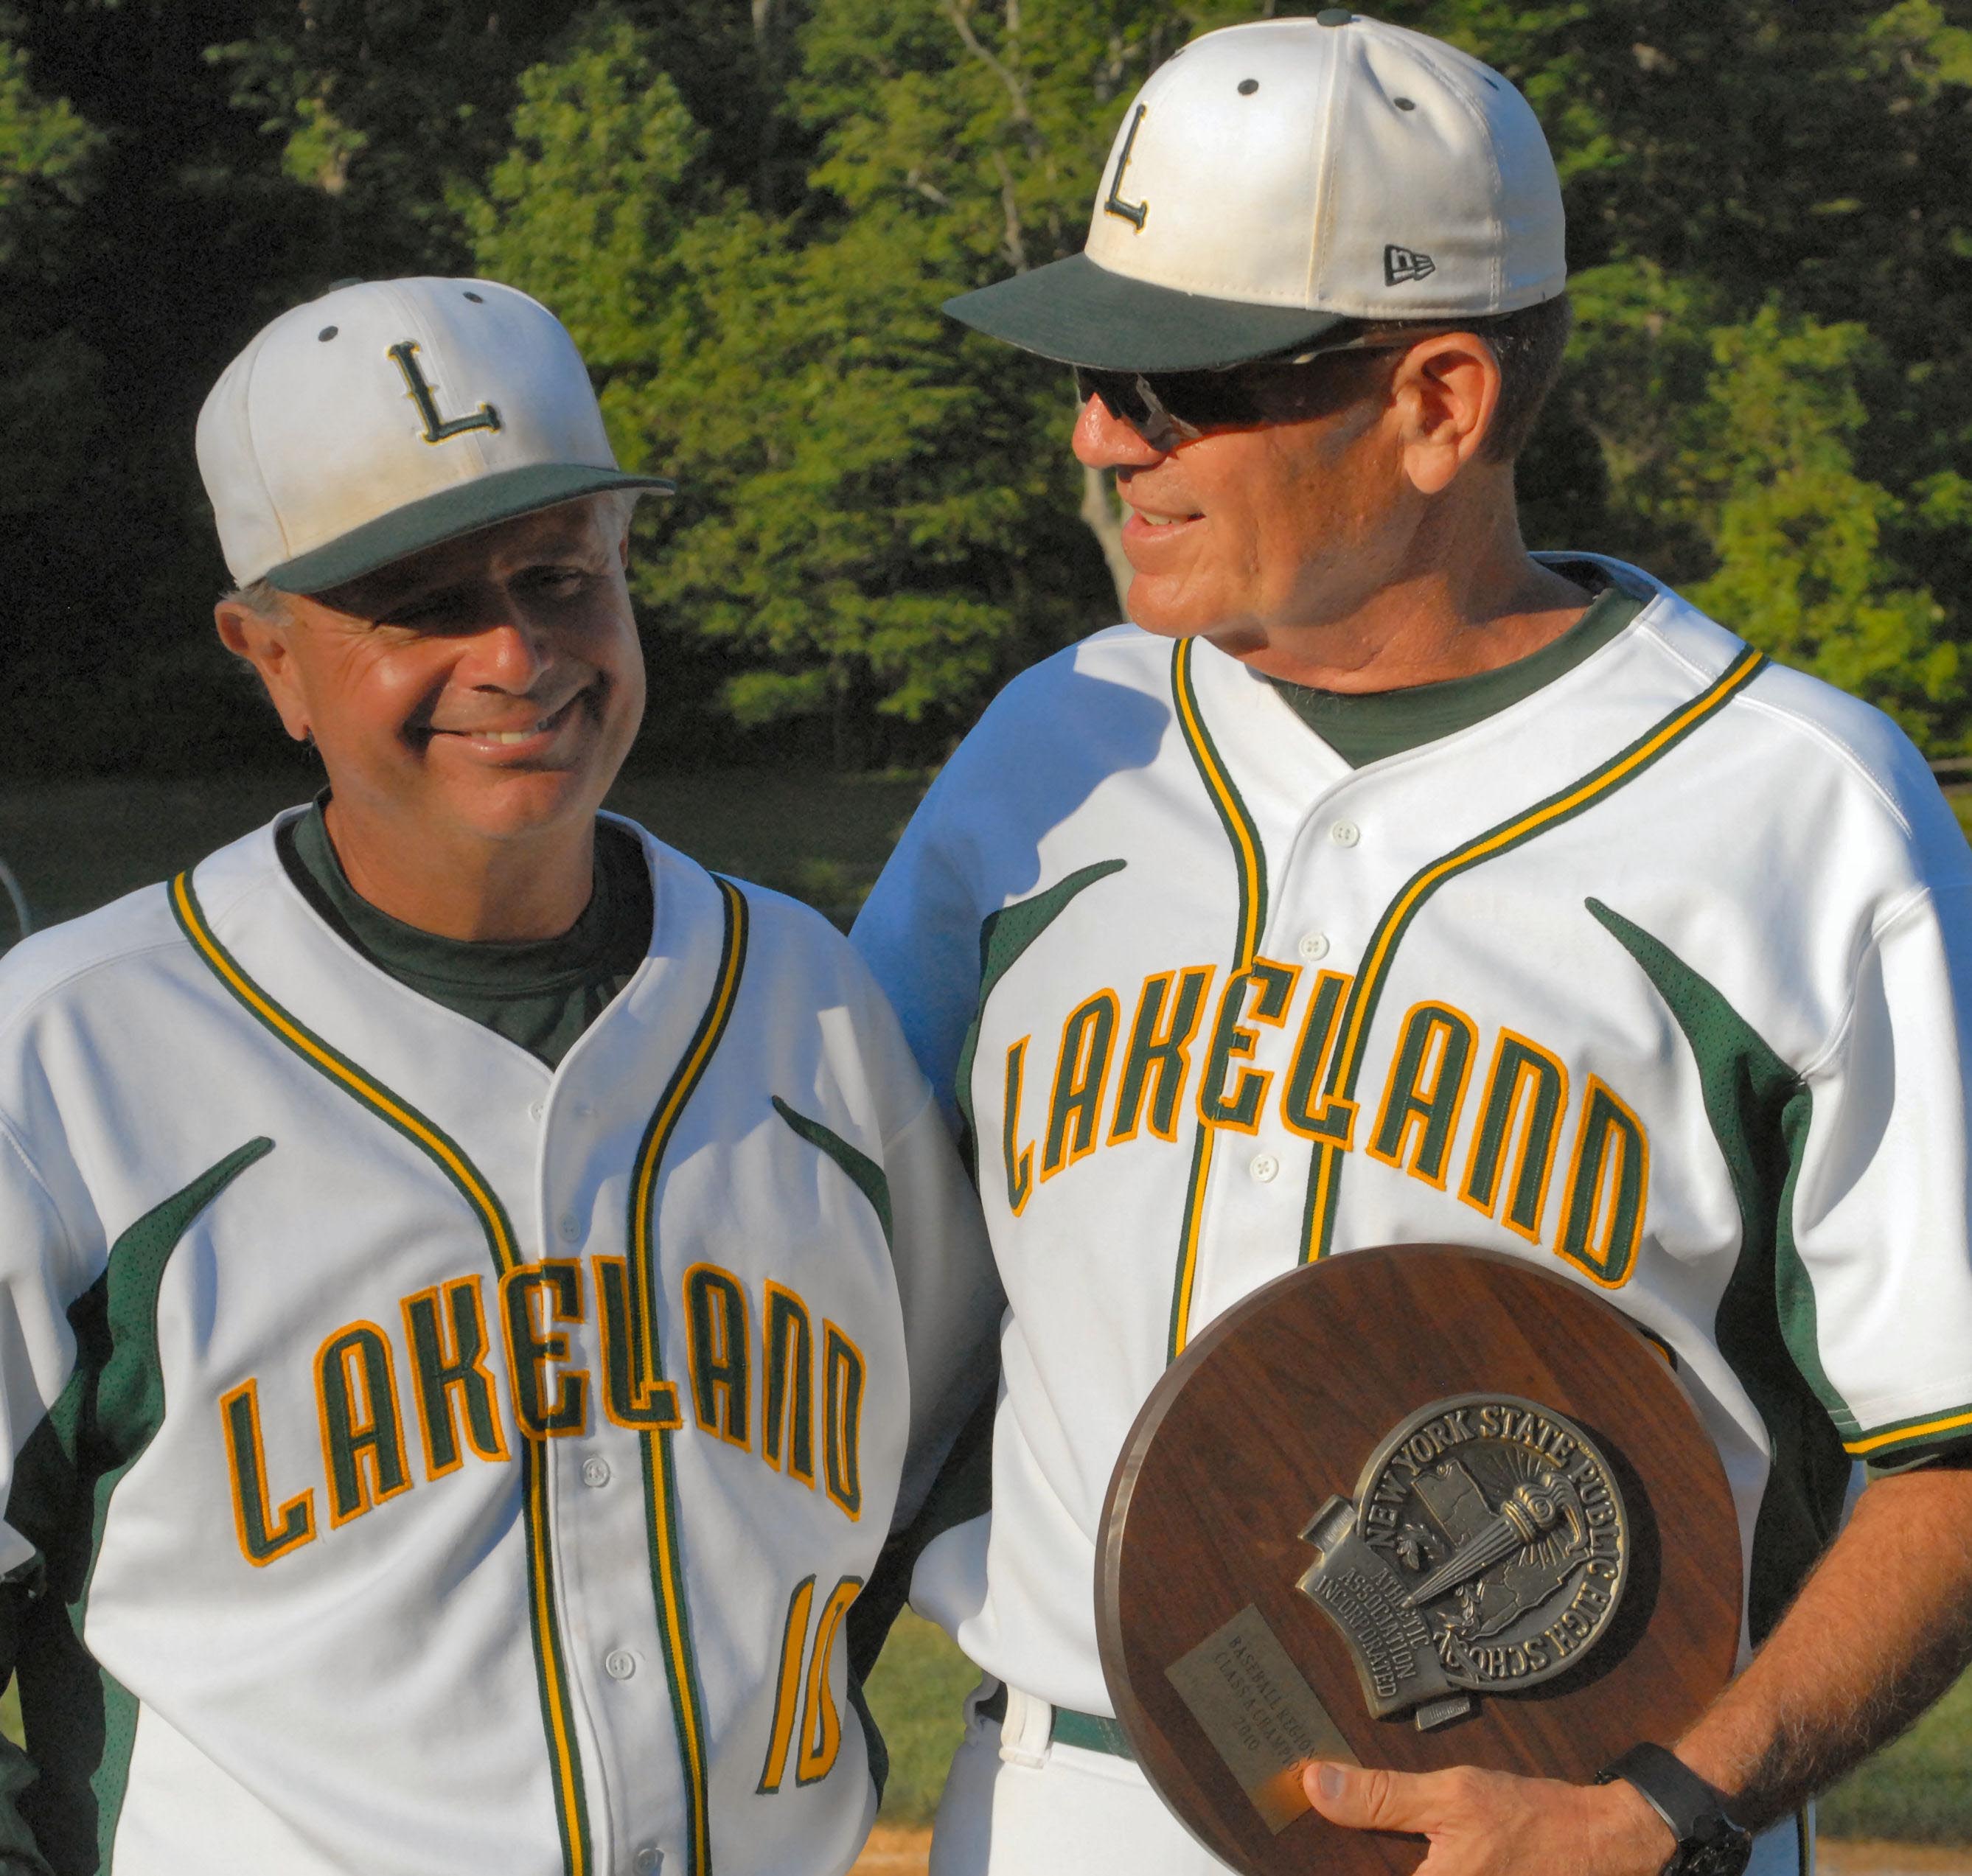 Lakeland baseball coaches Mike and Dennis Robinson – seen here during happier times in the spring of 2010 upon winning the only Region 1 championship in program history – are apparently done as coaches in the Lakeland School District.